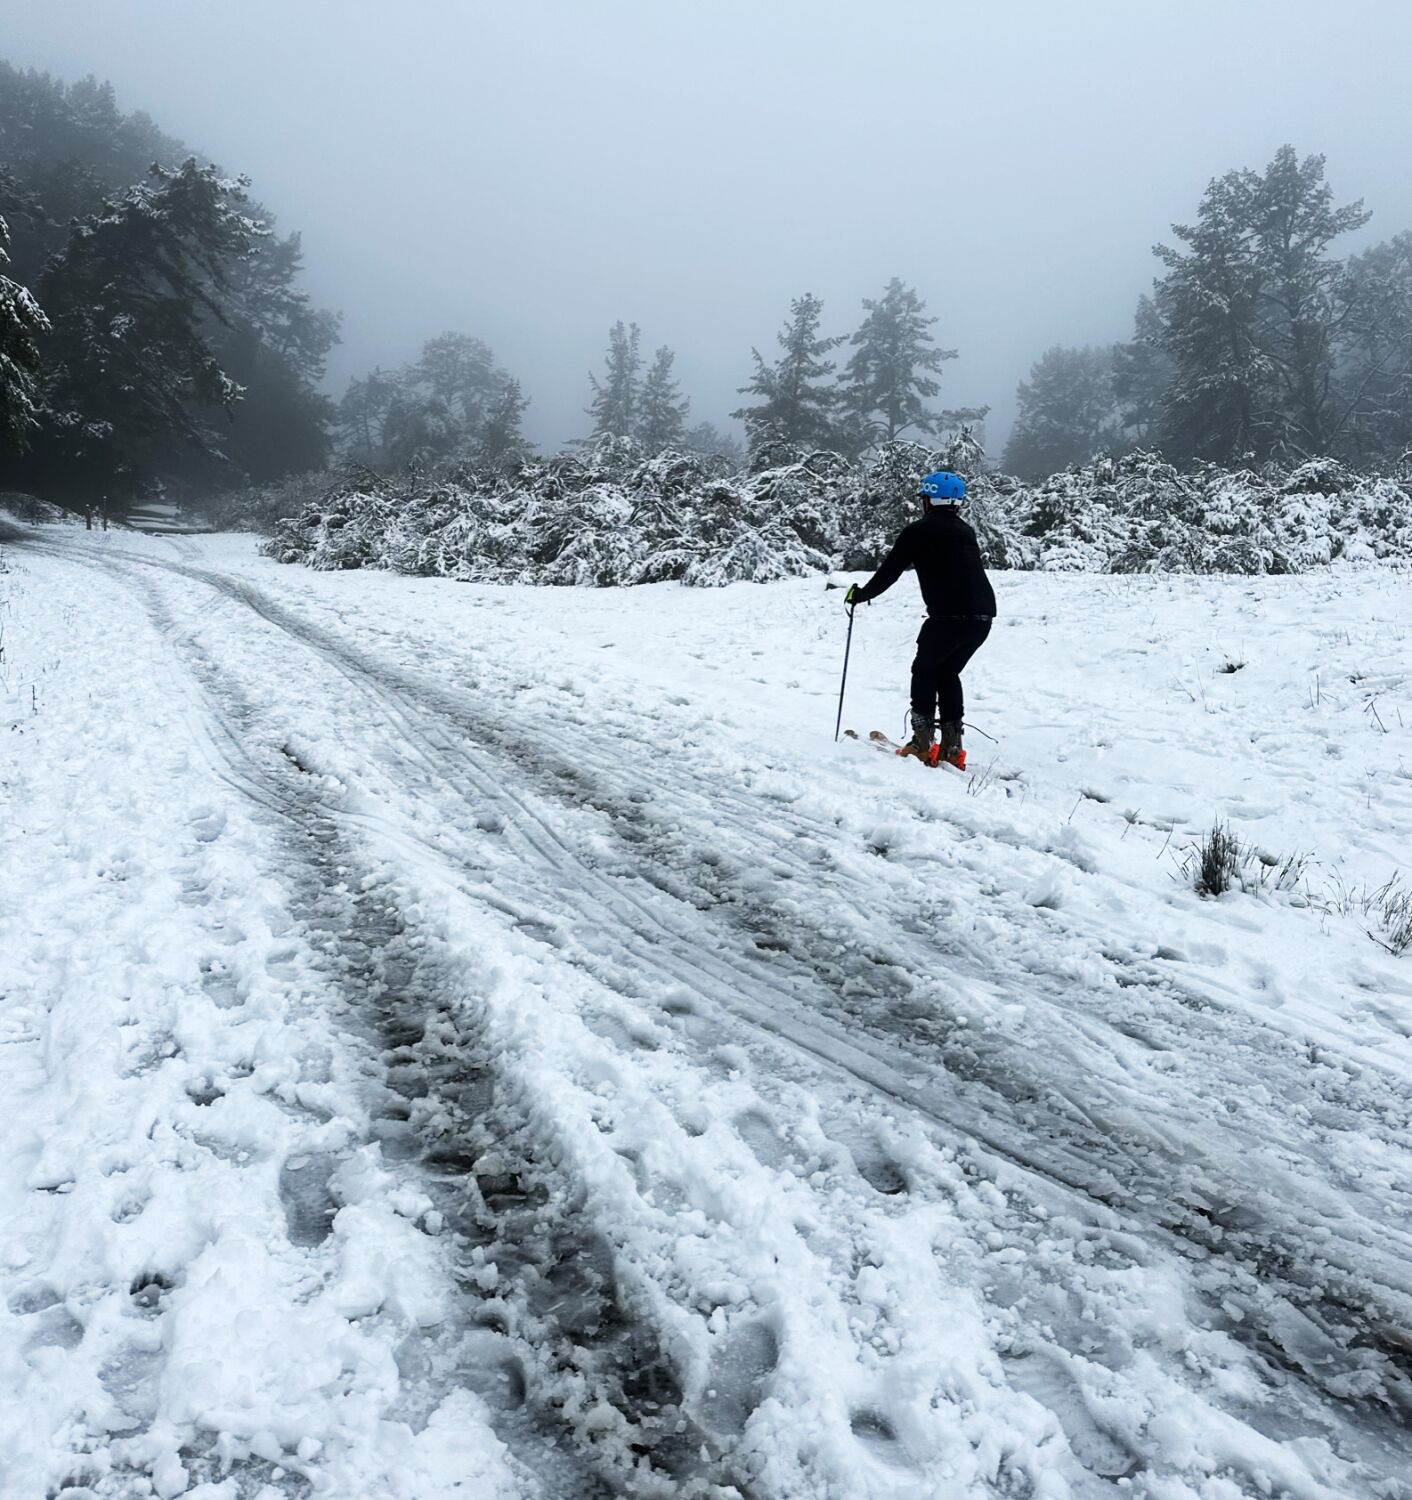 Berkeley goes skiing: Bay Area residents revel in rare low-elevation snow